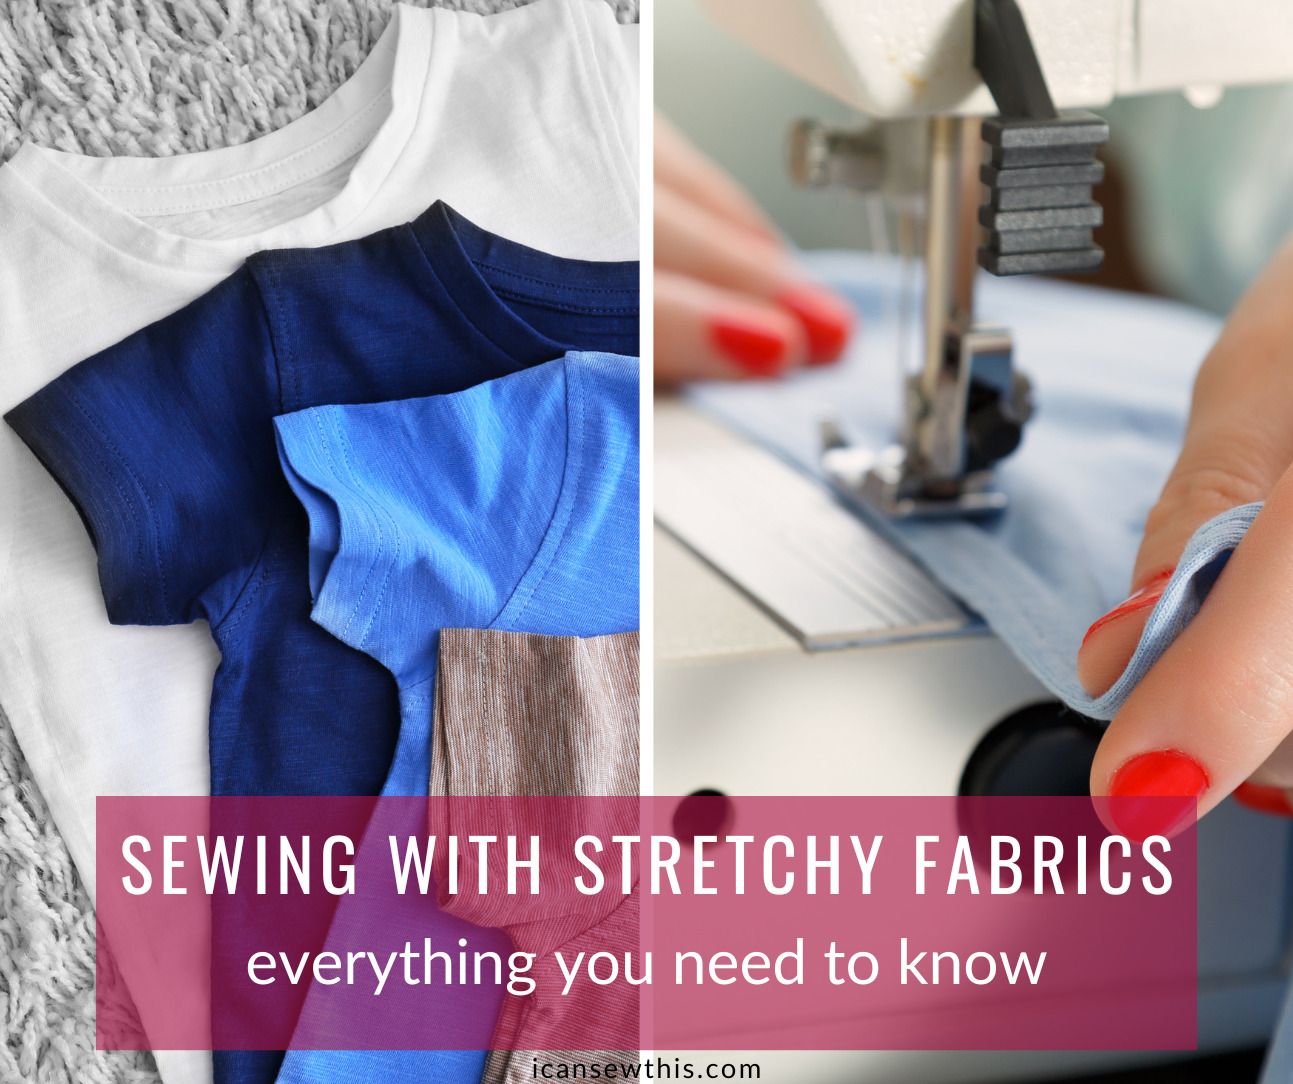 https://static.icansewthis.com/2023/02/knit-fabrics-sewing.jpg